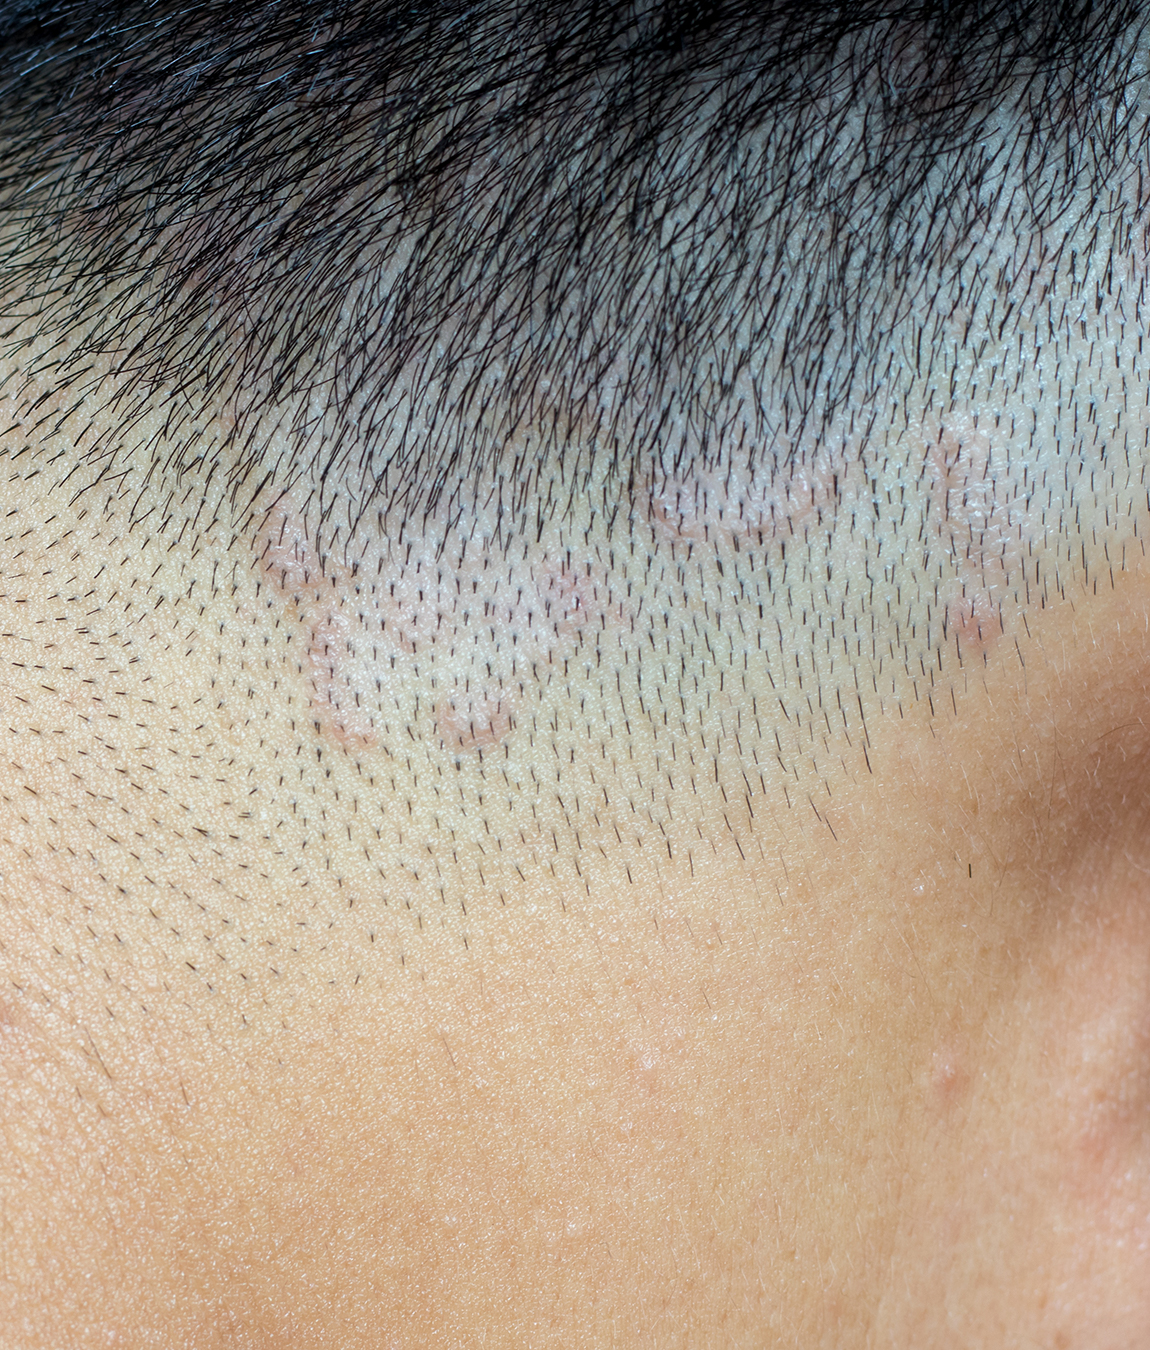 Ringworm on a person's scalp